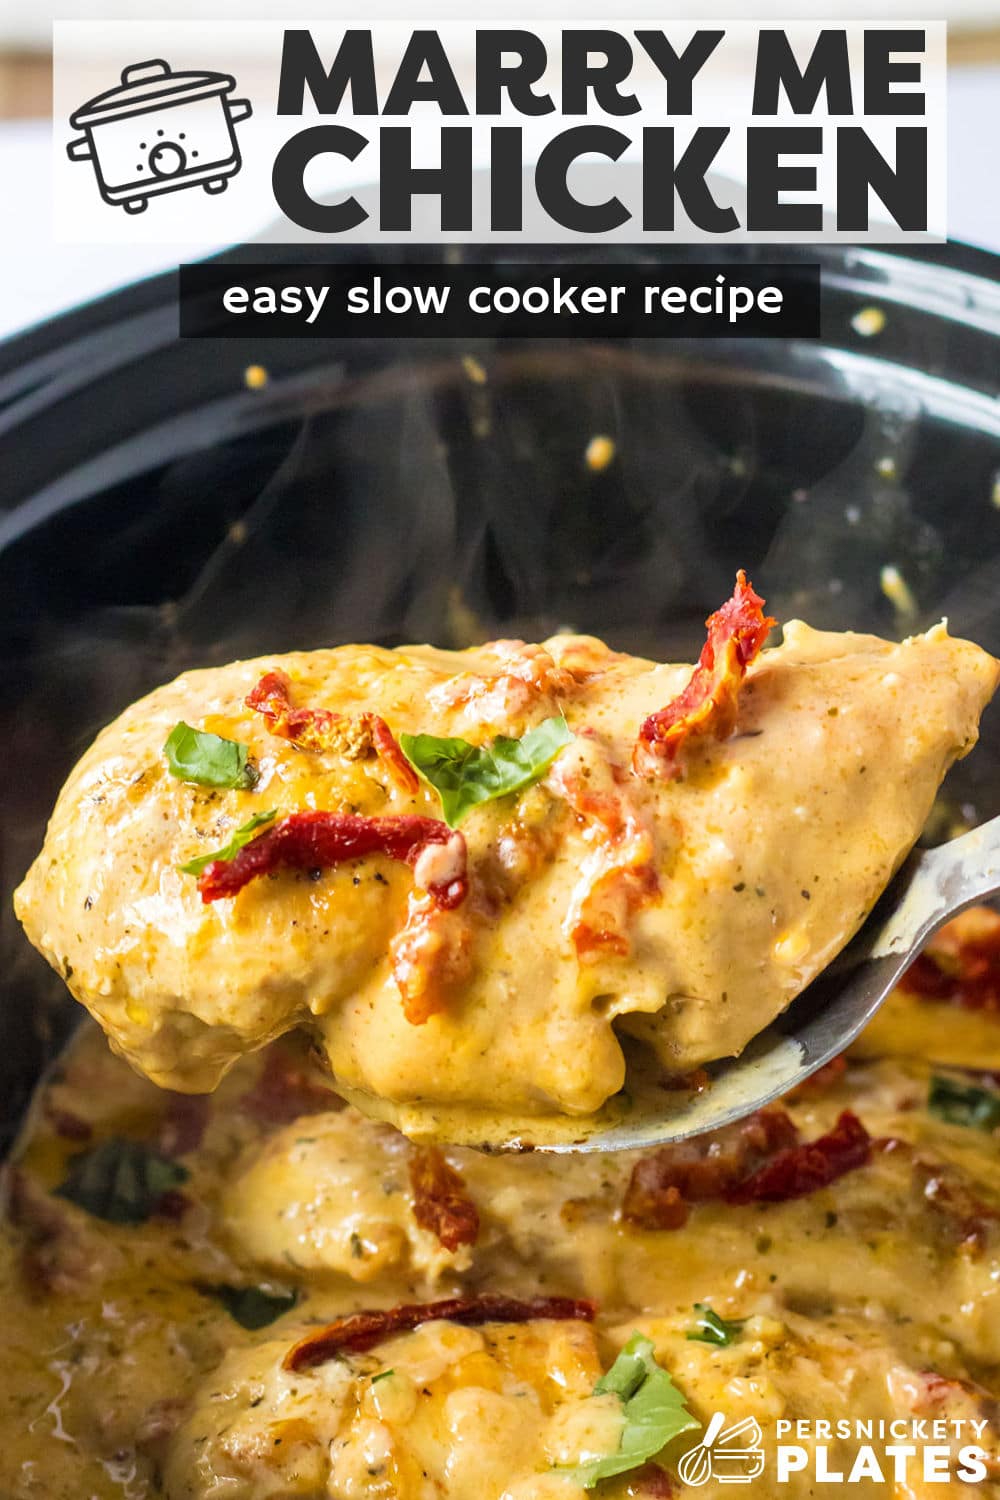 Slow cooker marry me chicken is an Italian-inspired recipe made with tender, juicy chicken slow-cooked in a seasoned, rich, buttery cream sauce with sundried tomatoes and basil. It’s fancy enough for a special occasion but easy enough to make throughout the week. Serve over pasta, rice, or mashed potatoes for a tasty meal everyone will devour! | www.persnicketyplates.com